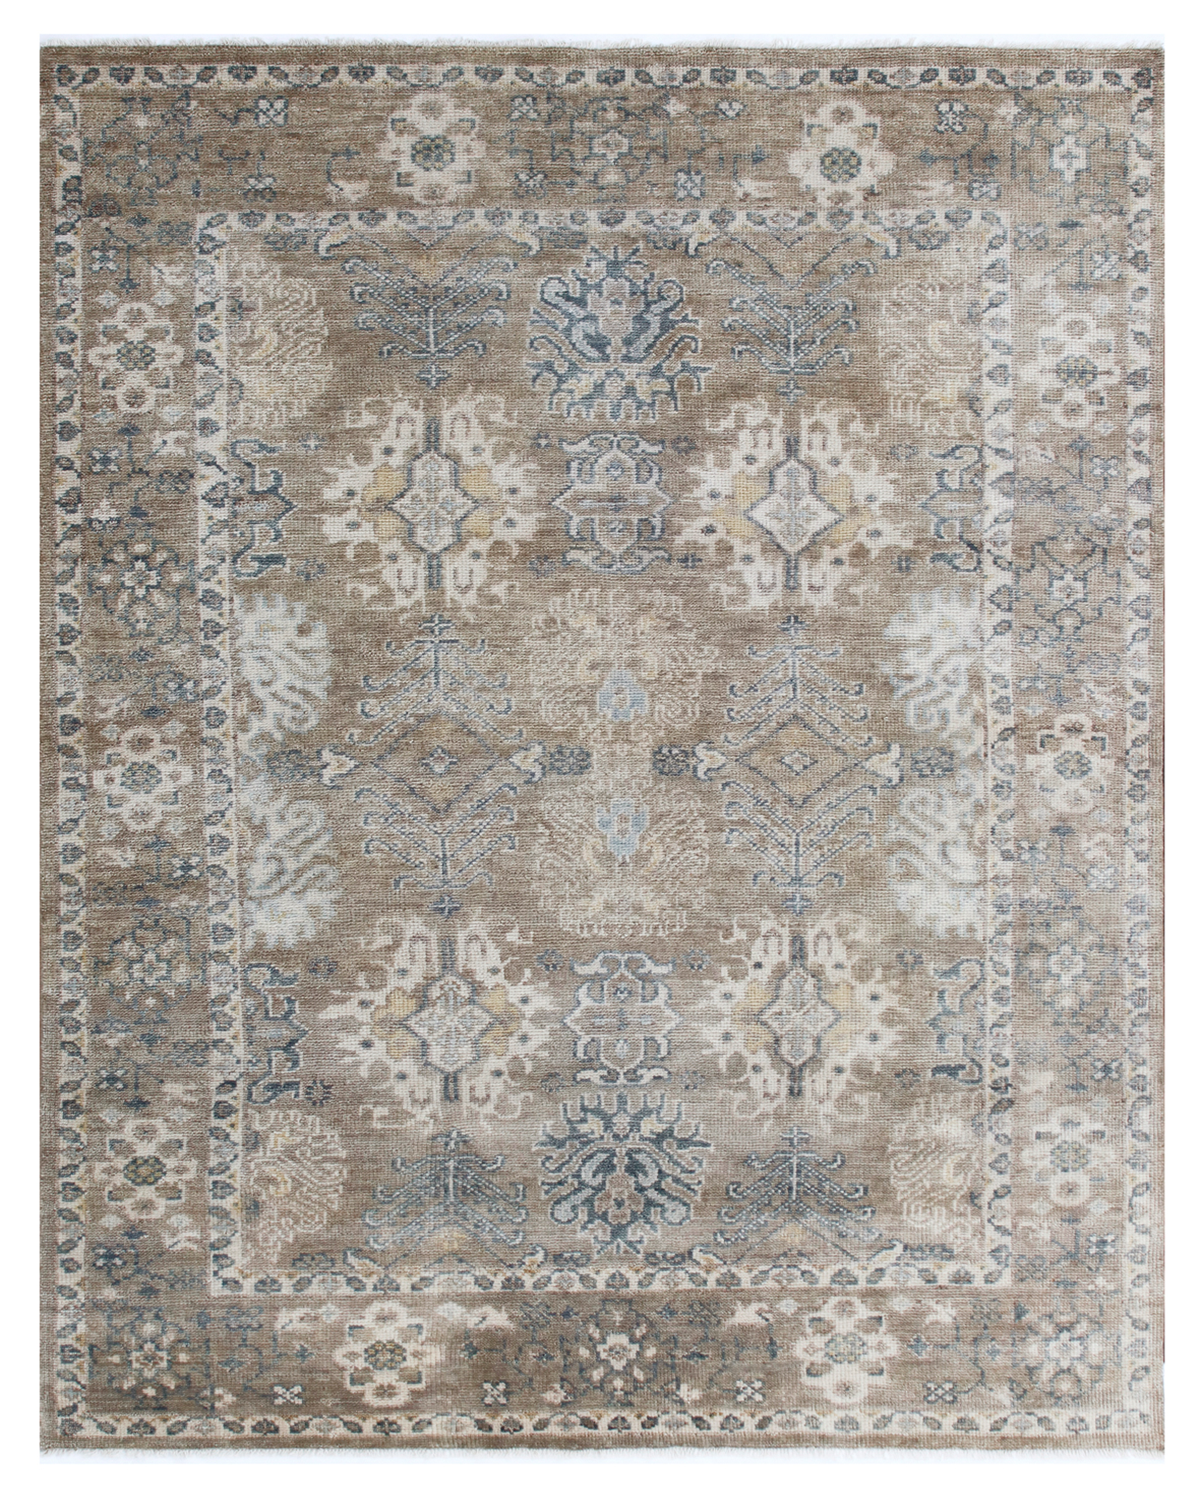 Hand-knotted Transitional Rug (MB-15B)